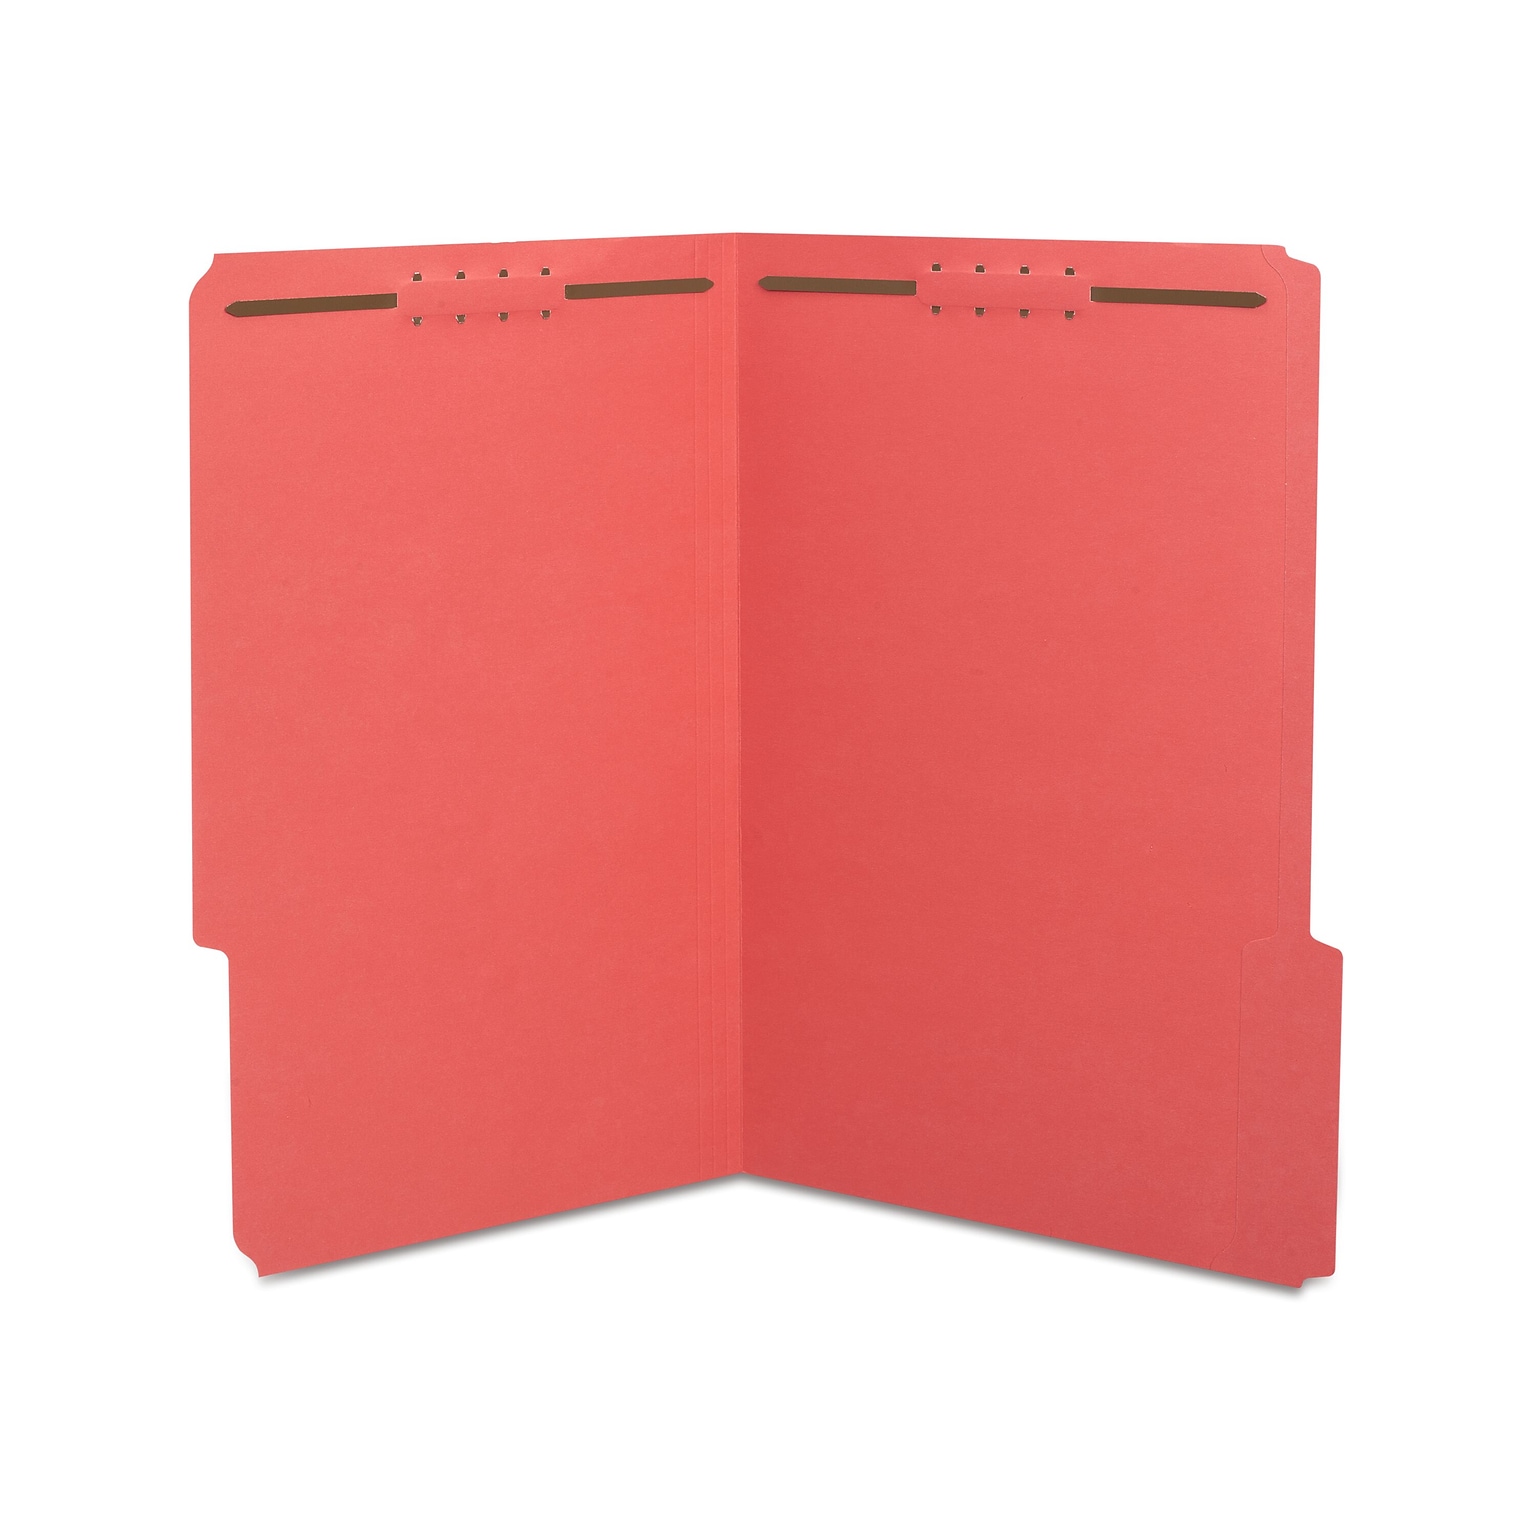 Quill Brand®  1/3-Cut Assorted 2-Fastener Folders, Legal, Red, 50/Box (7358RD)